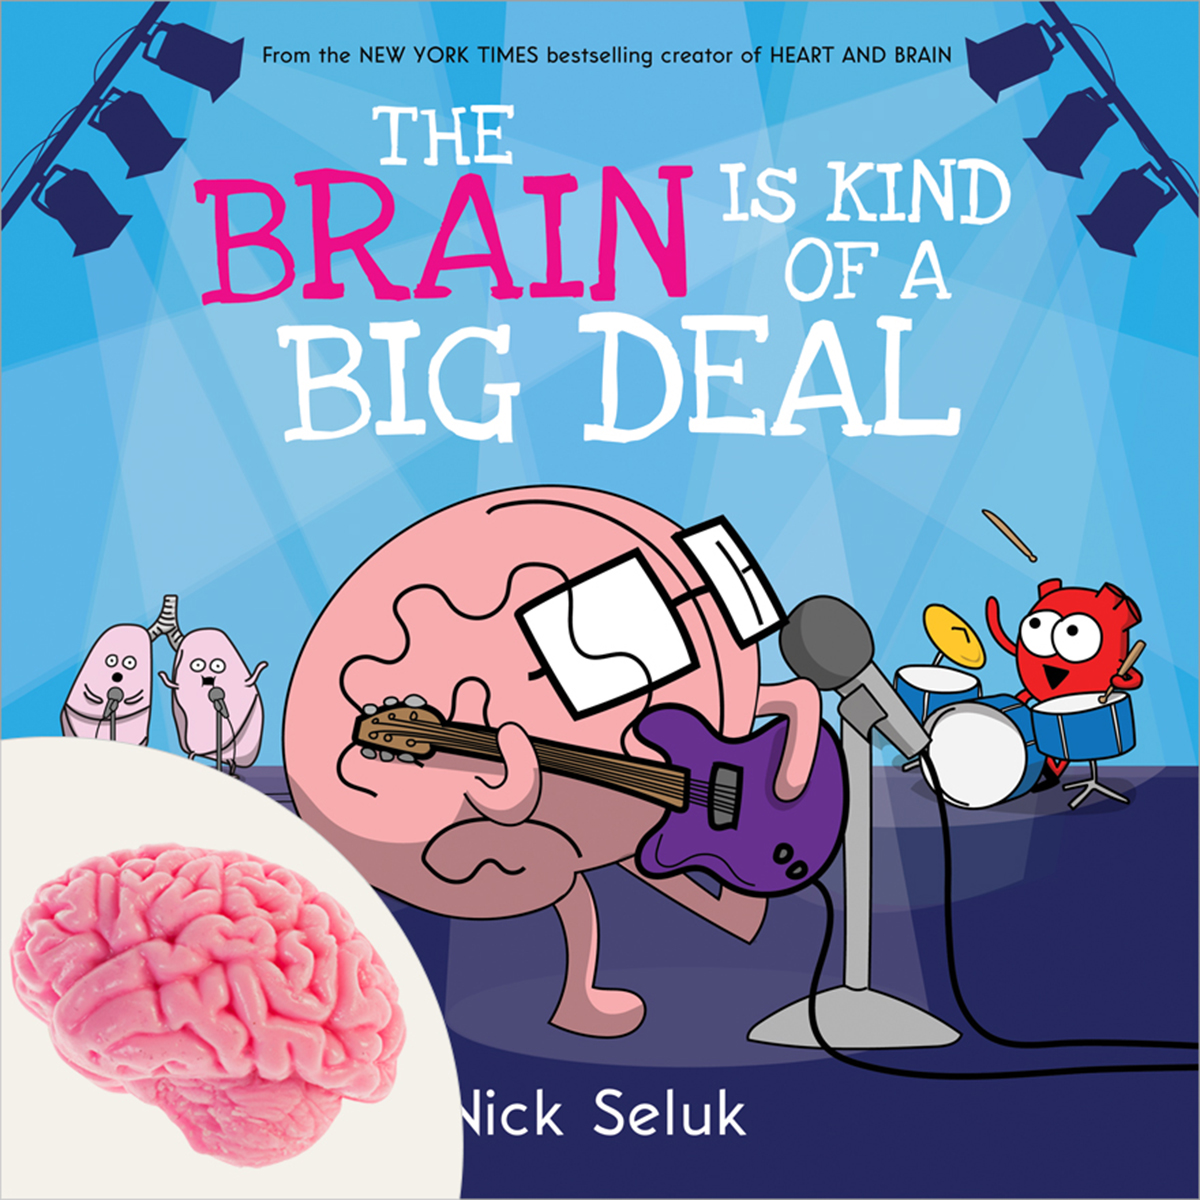 The Brain is Kind of a Big Deal Pack 